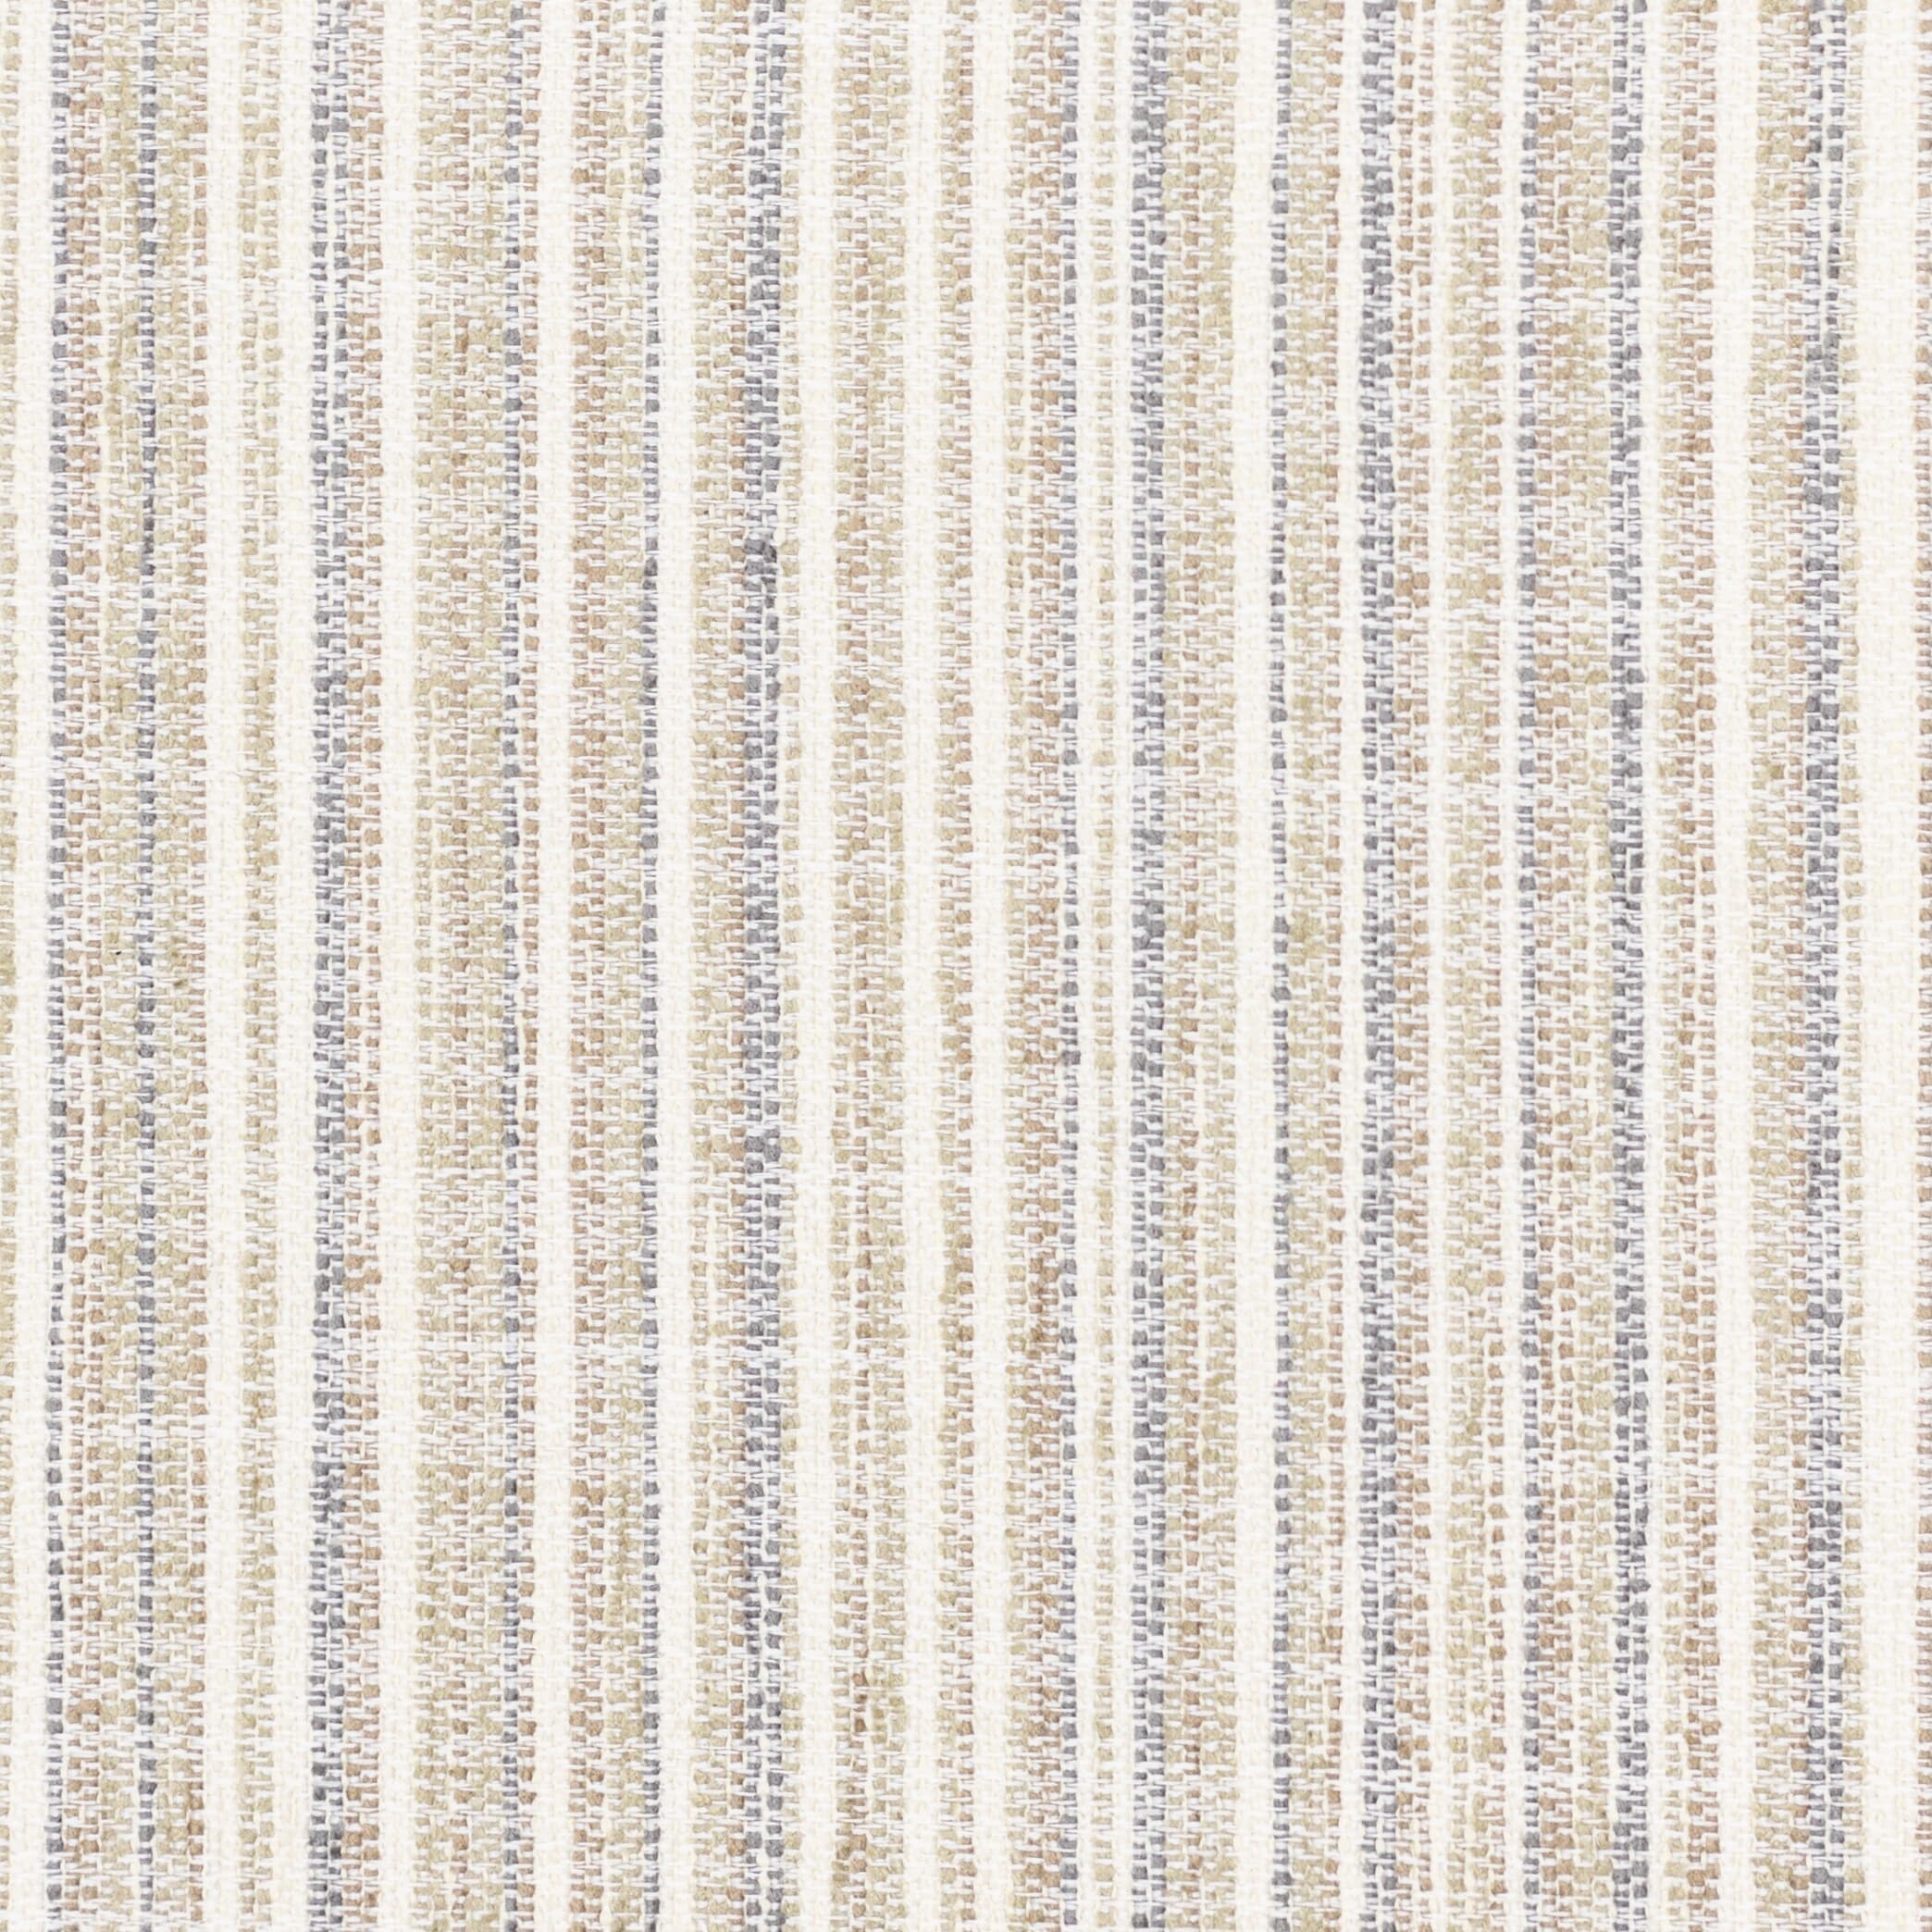 Inherit 1 Taupe by Stout Fabric